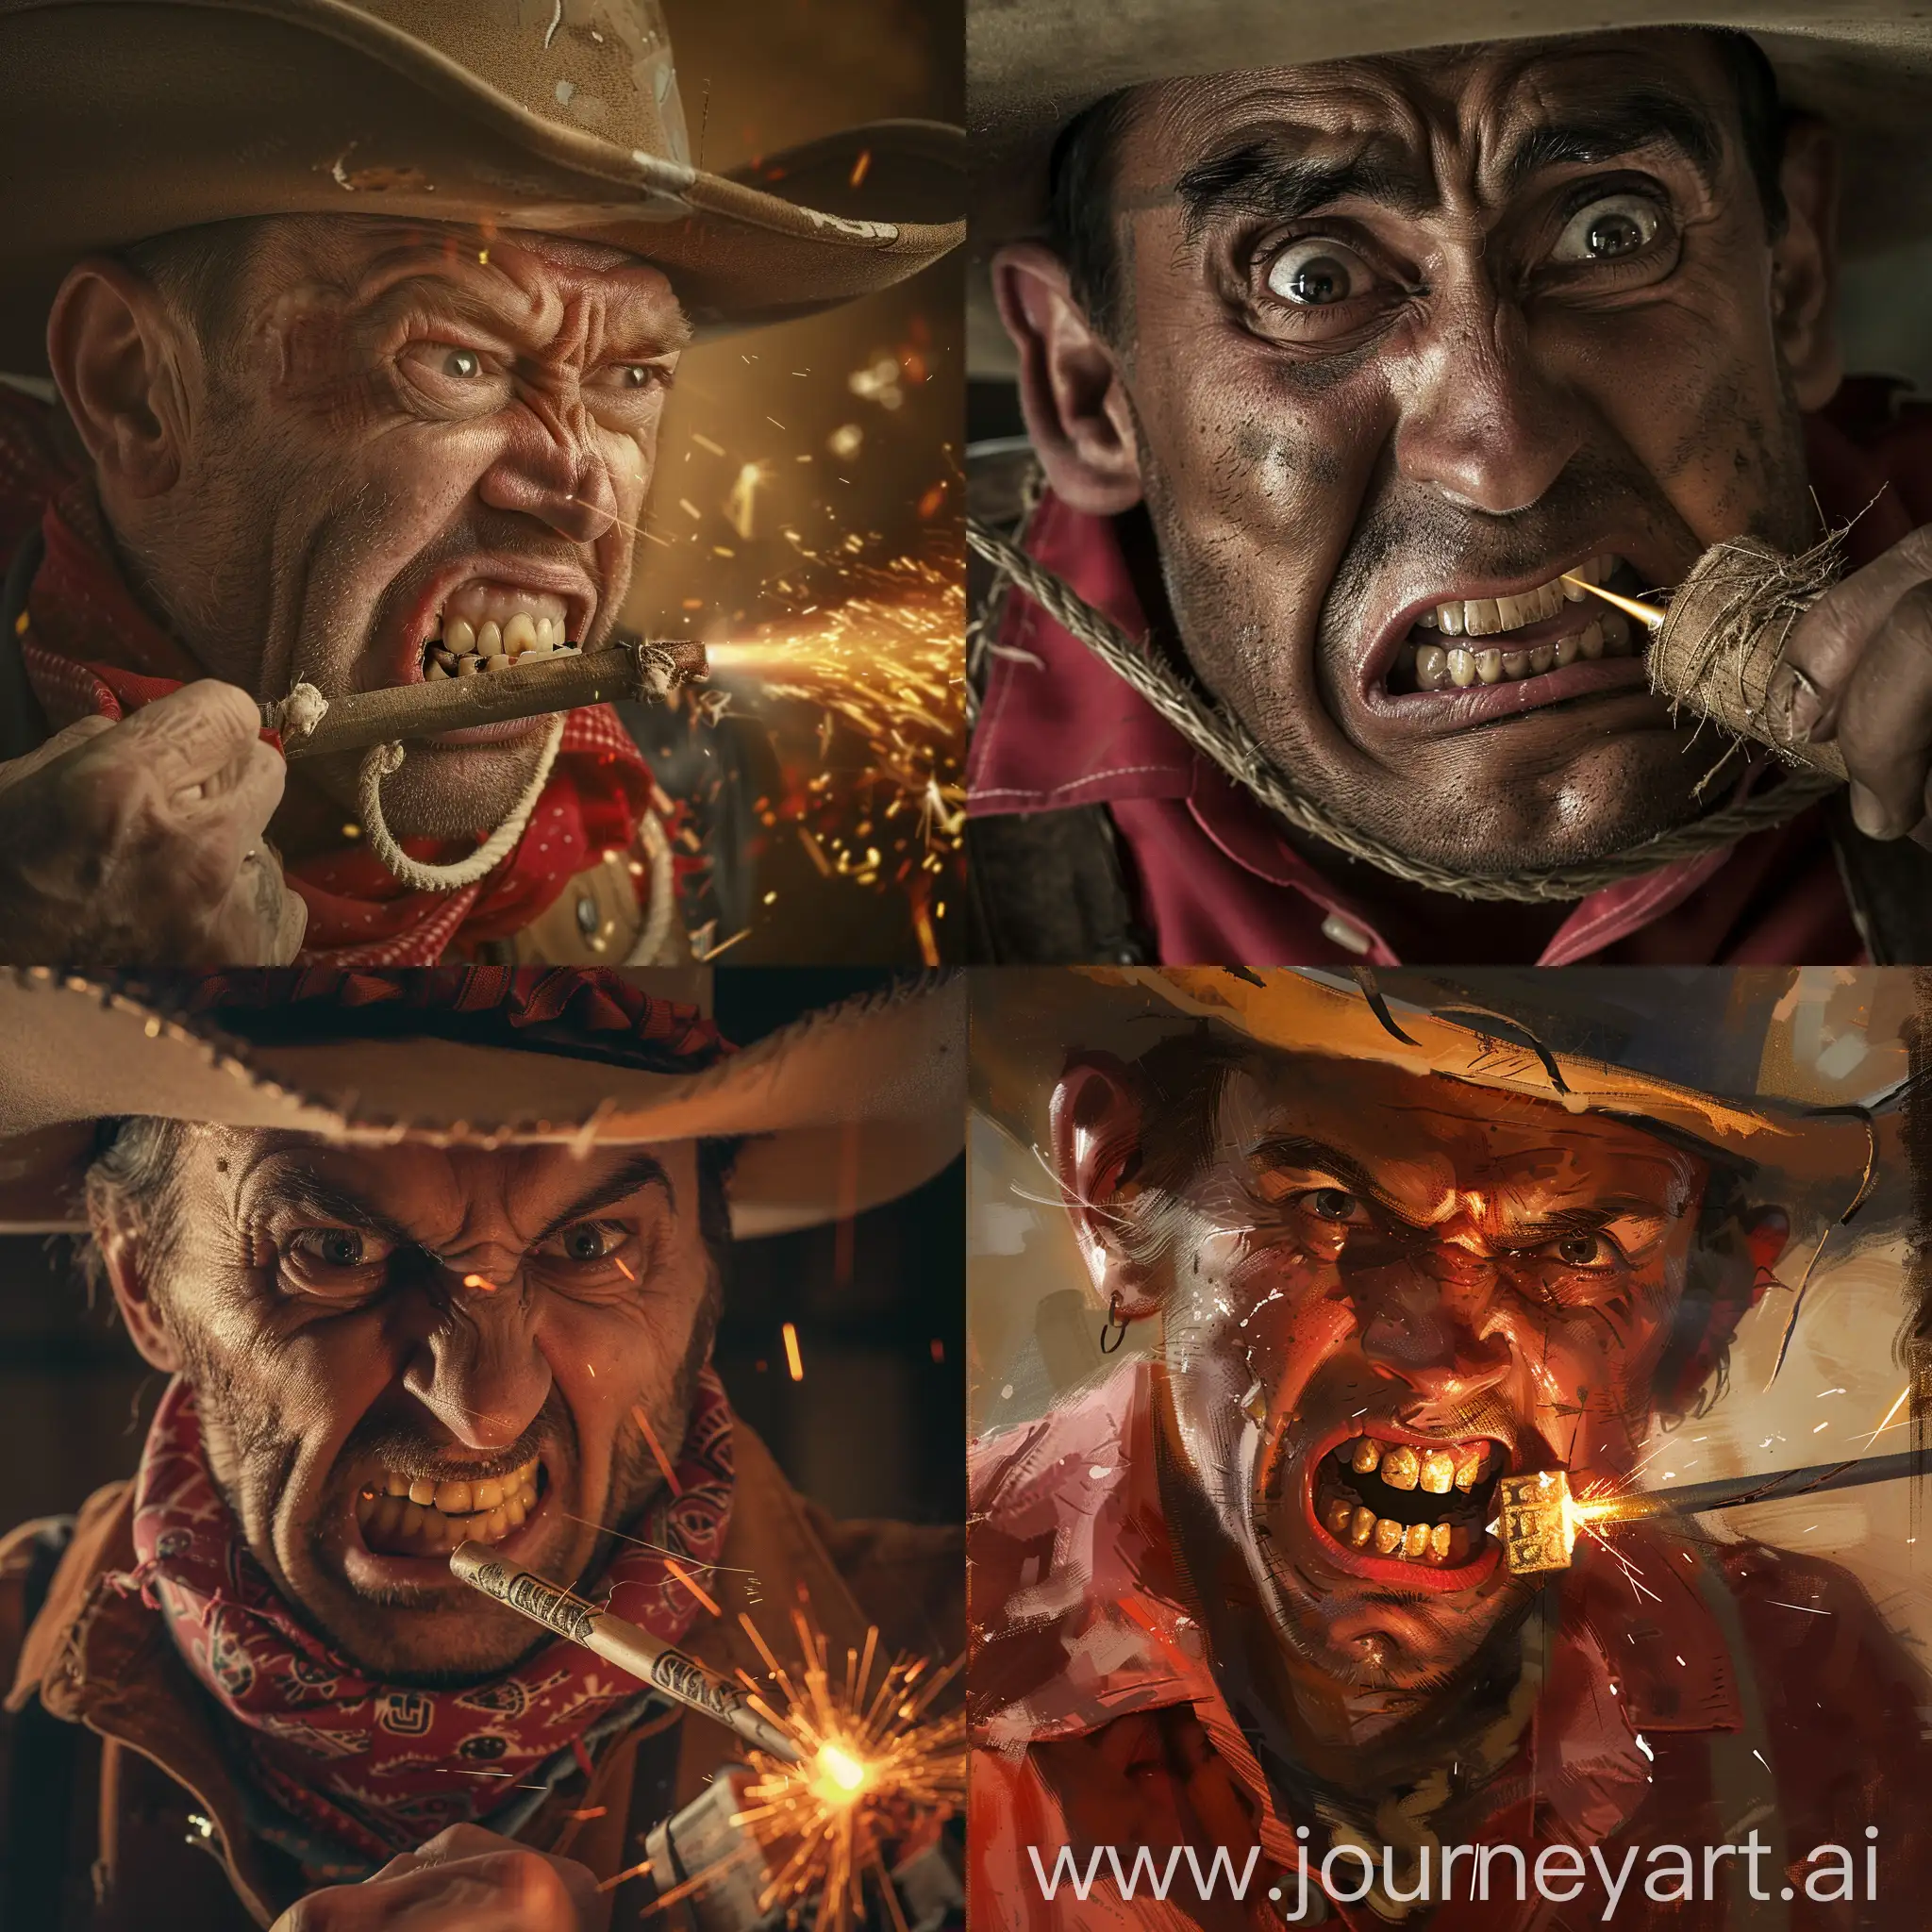 closeup portrait of a worried cowboy with clenched teeth biting a stick of dynamite while lighting the fuse